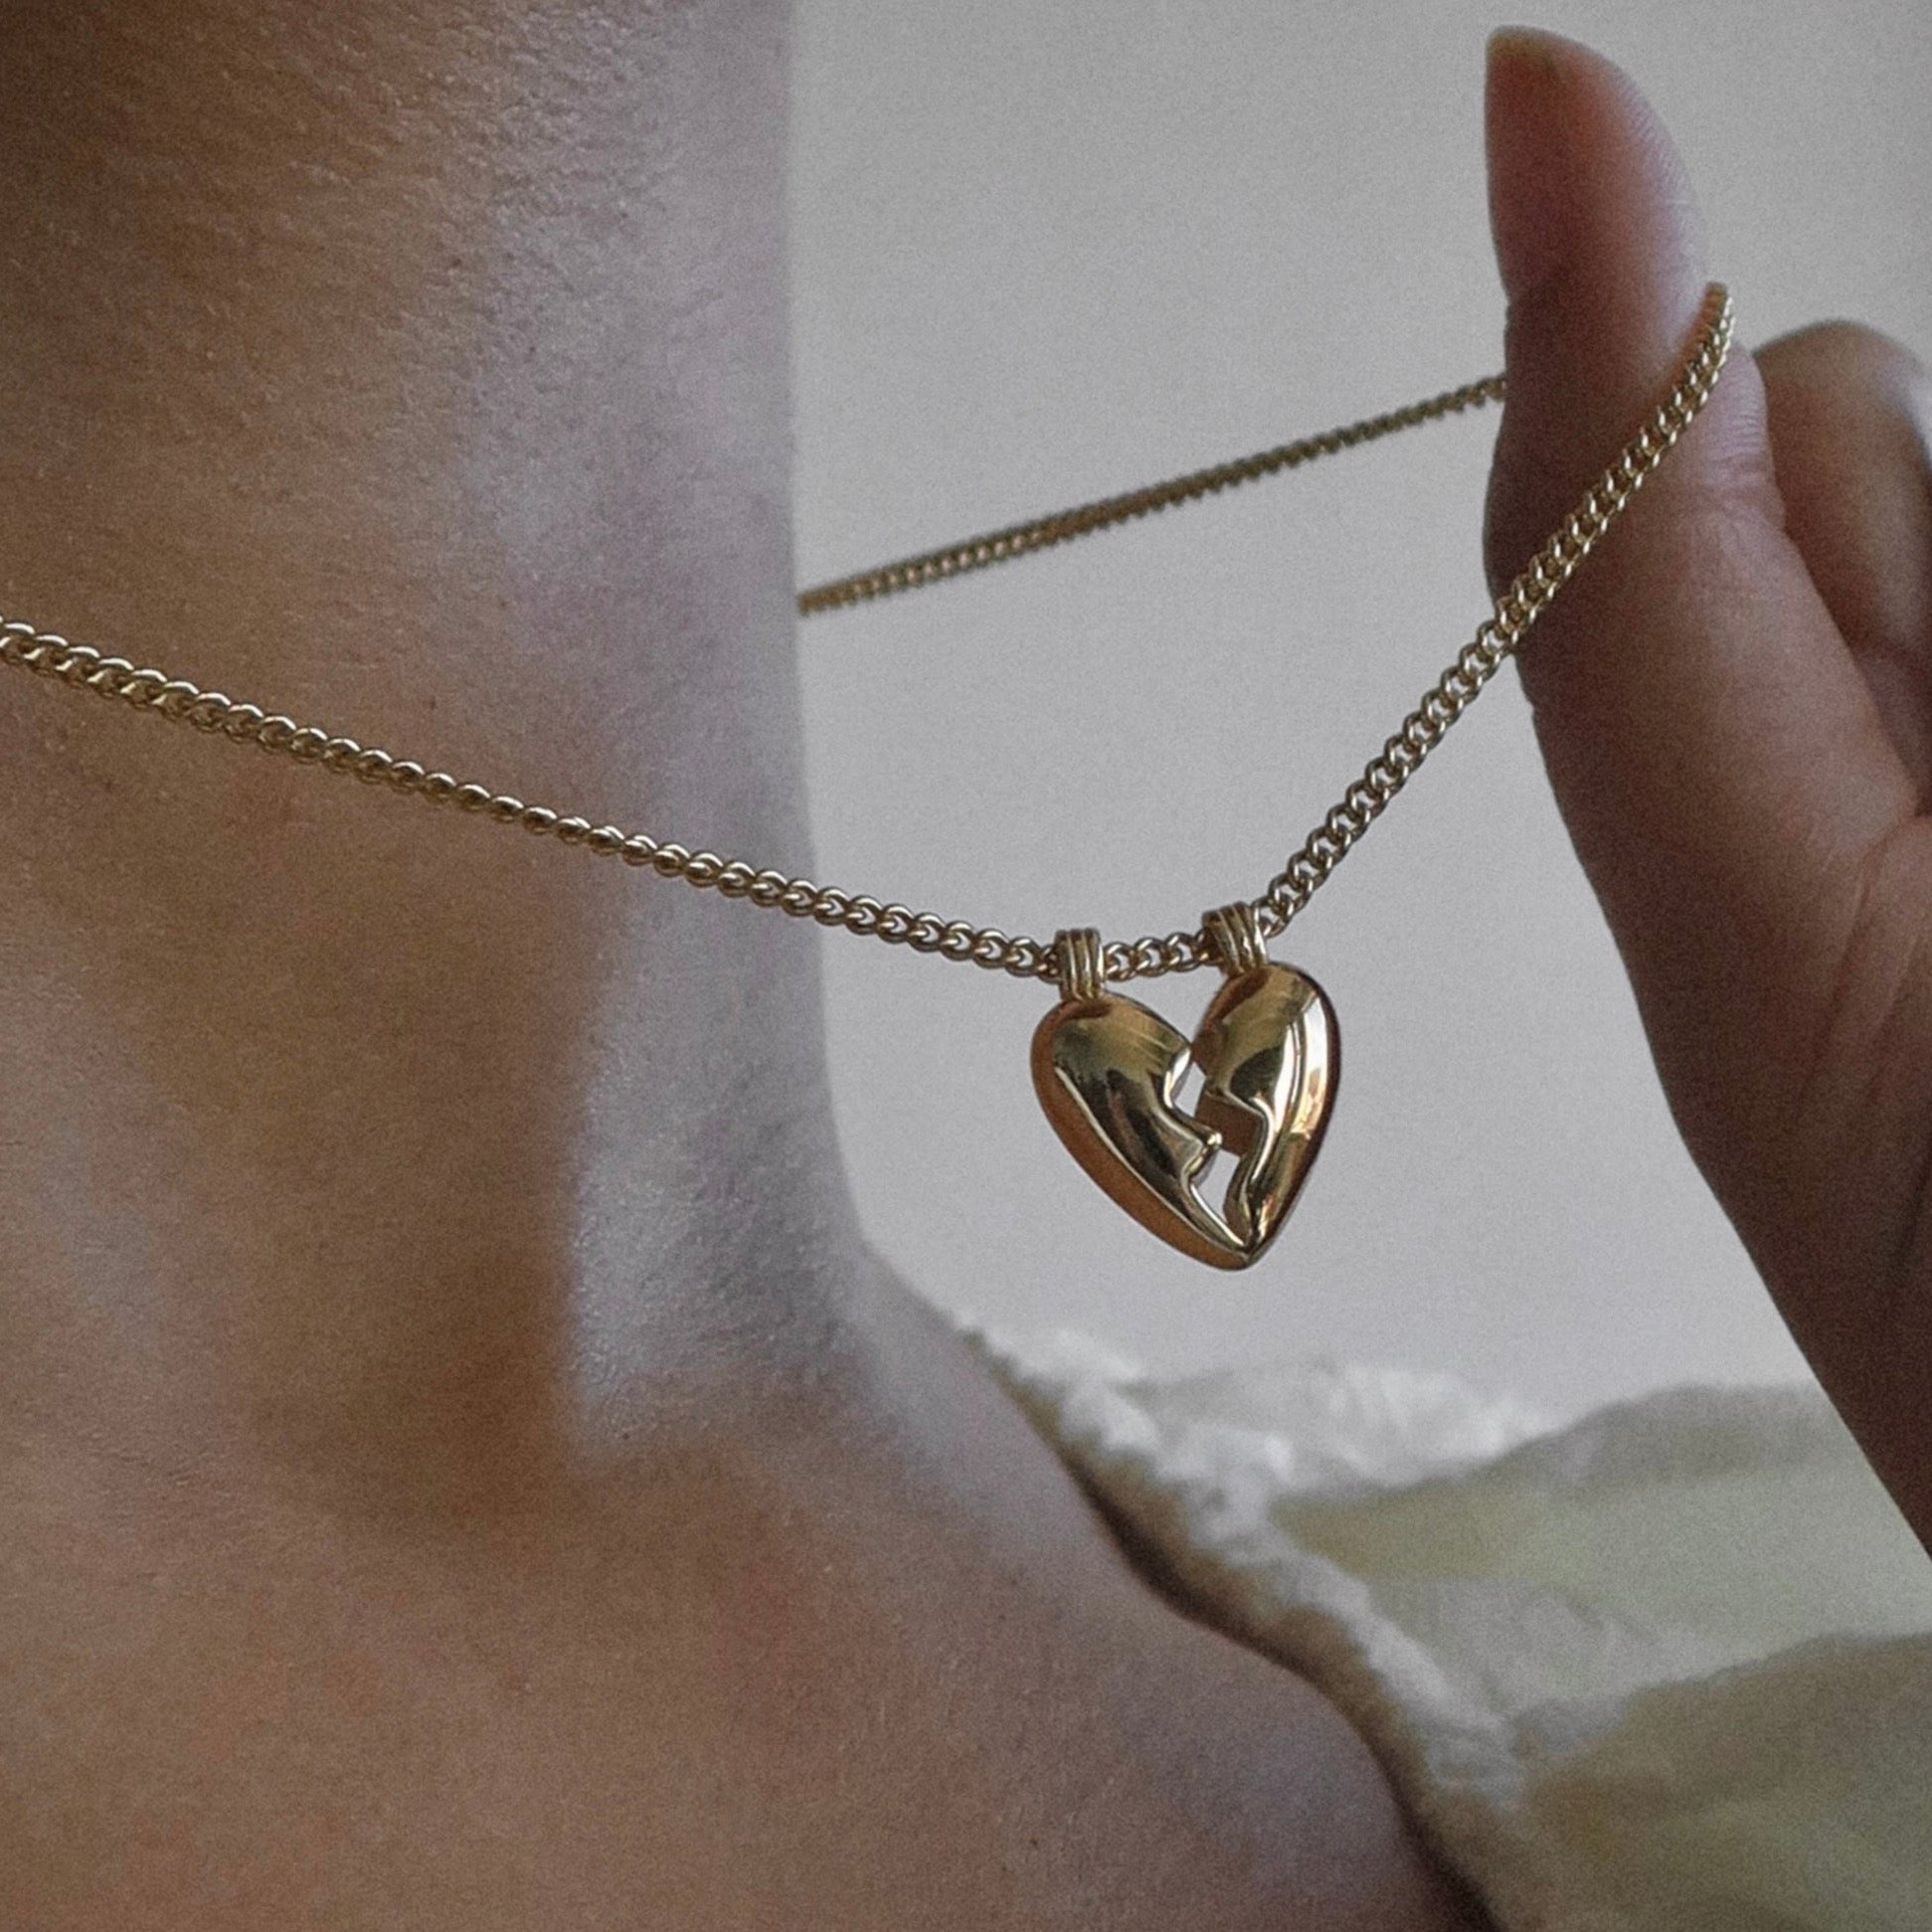 Couple Broken Heart Necklace in 18k Gold Vermeil Personalized with 2 names  | Forever My